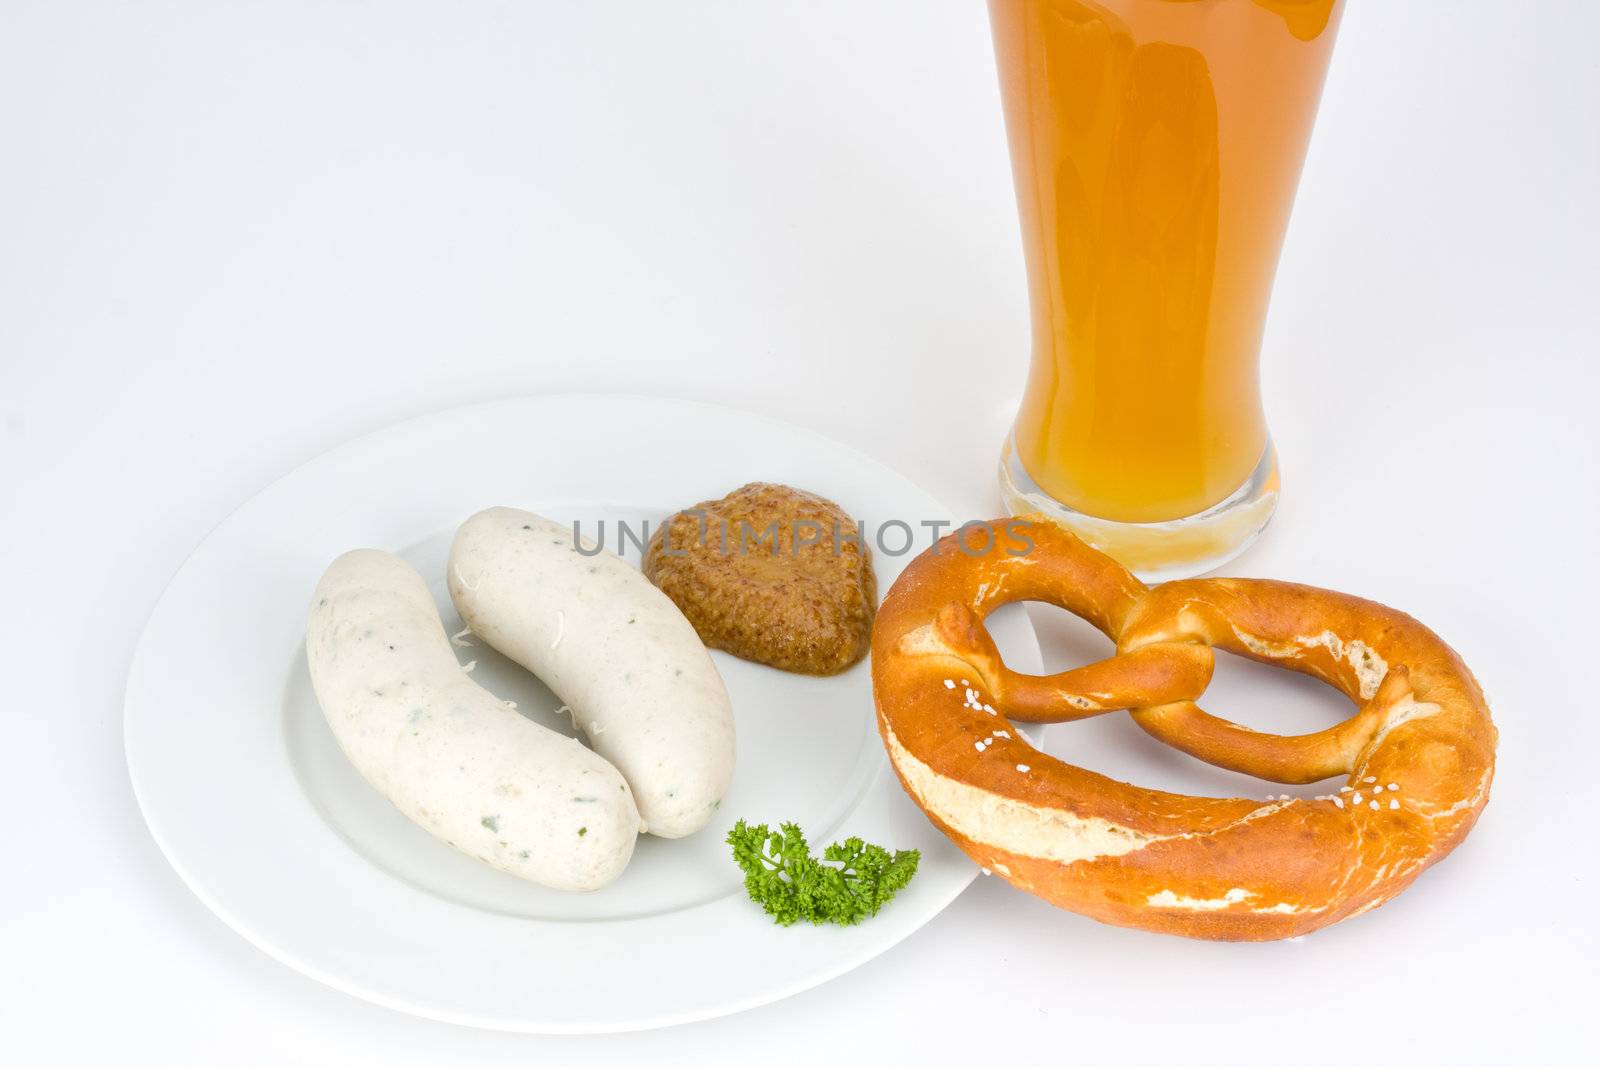 bavarian white sausage, wheat beer and pretzel by bernjuer